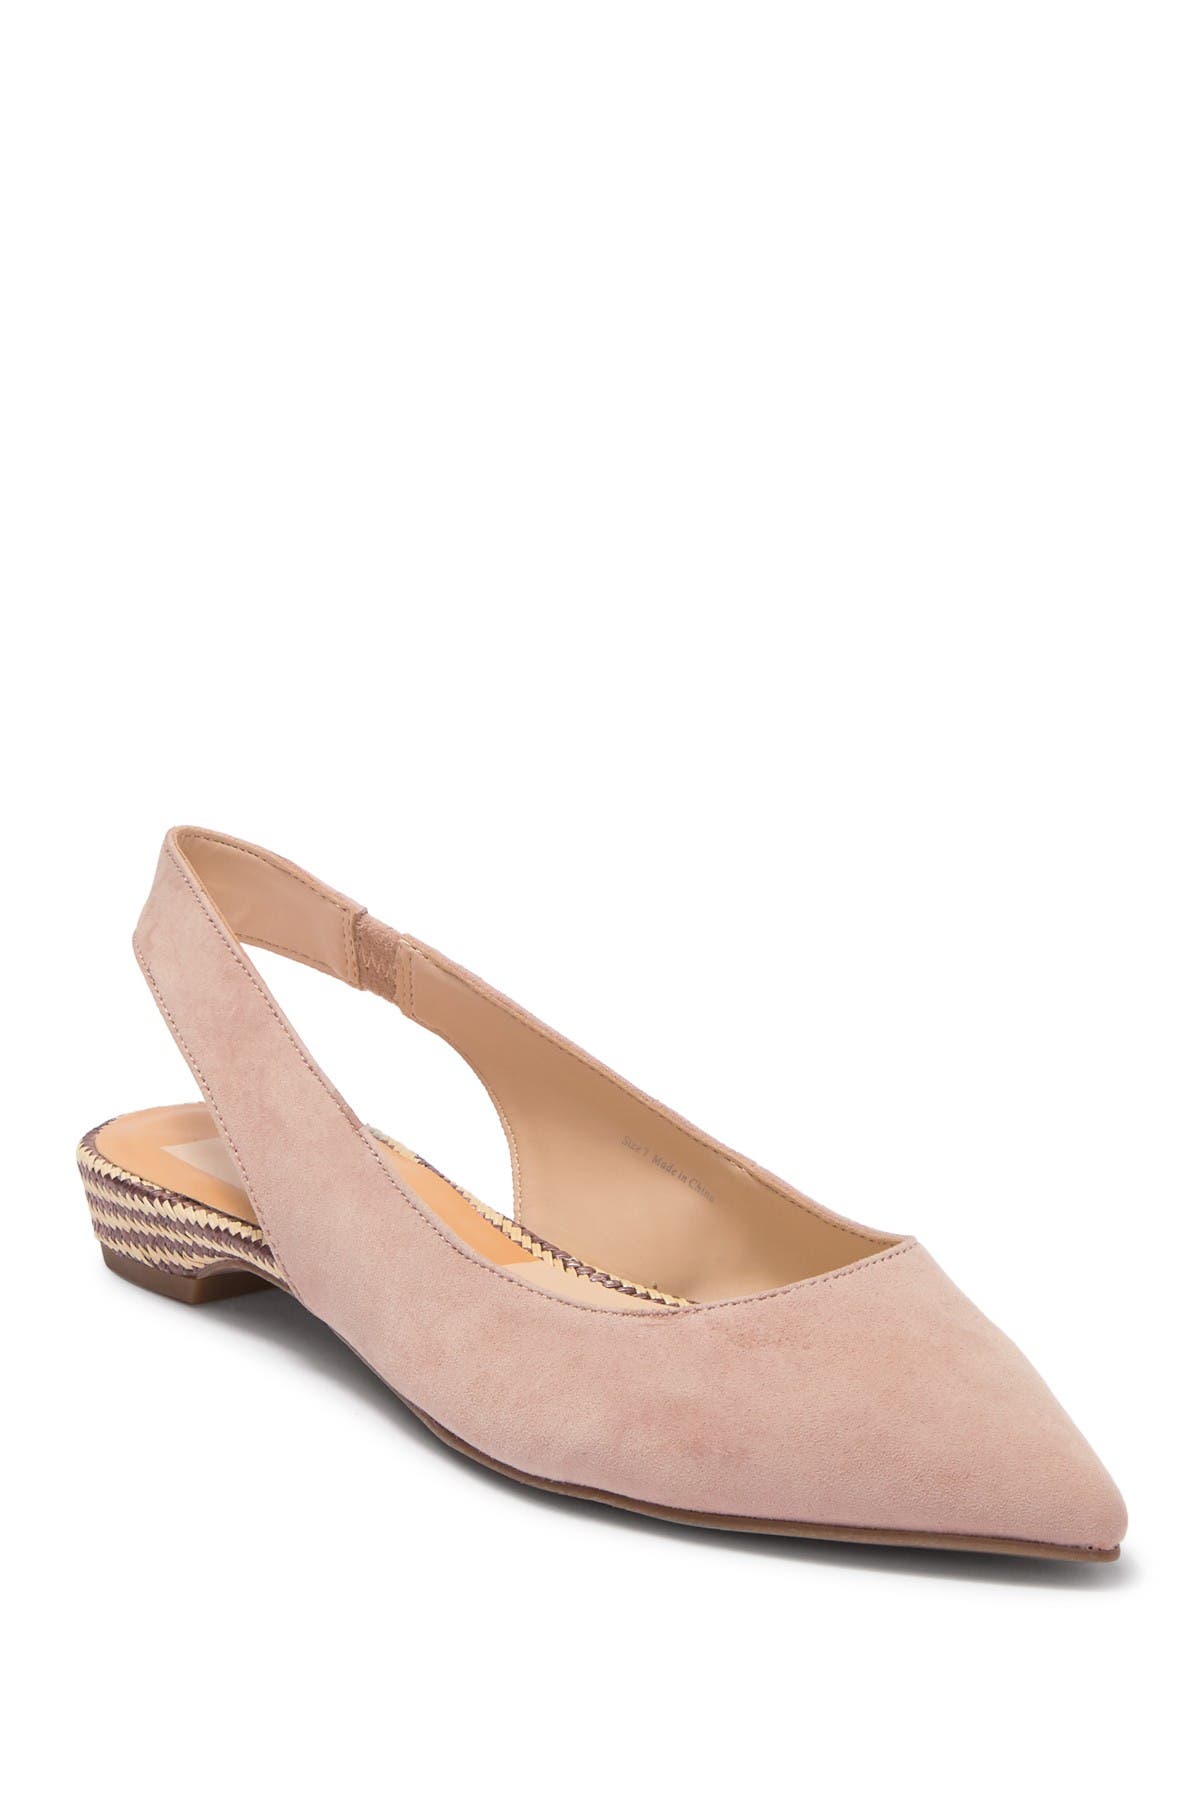 Dolce Vita | Abe Suede Pointed Toe Flat 